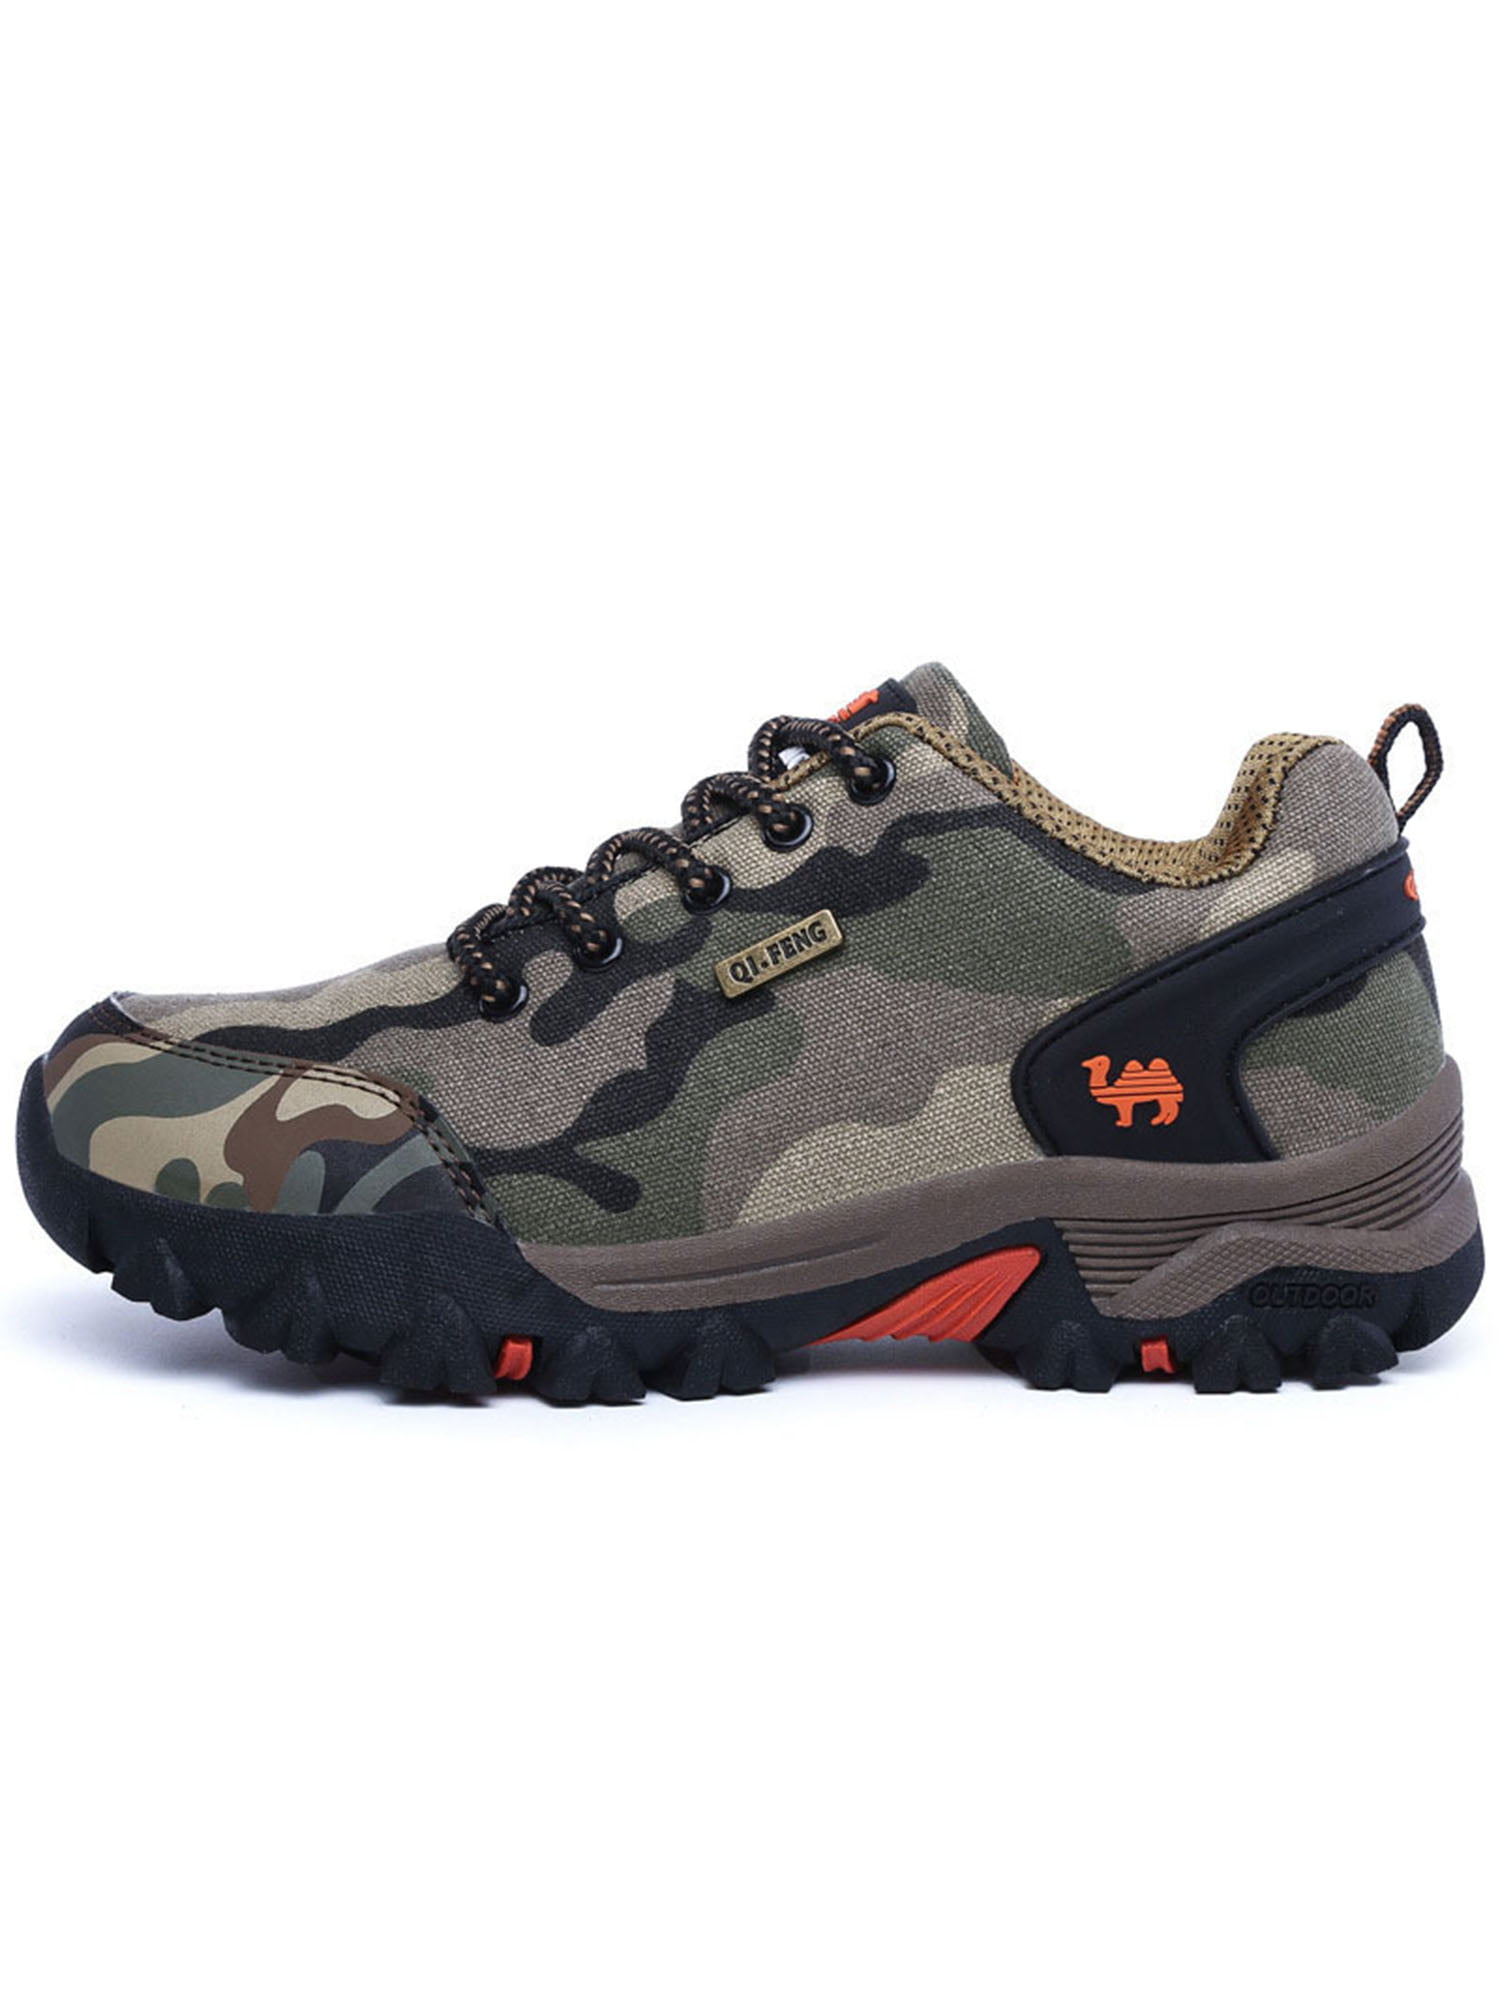 Men's Camouflage Work Safety Shoes Steel Toe Boots Indestructible Sneakers ESD 